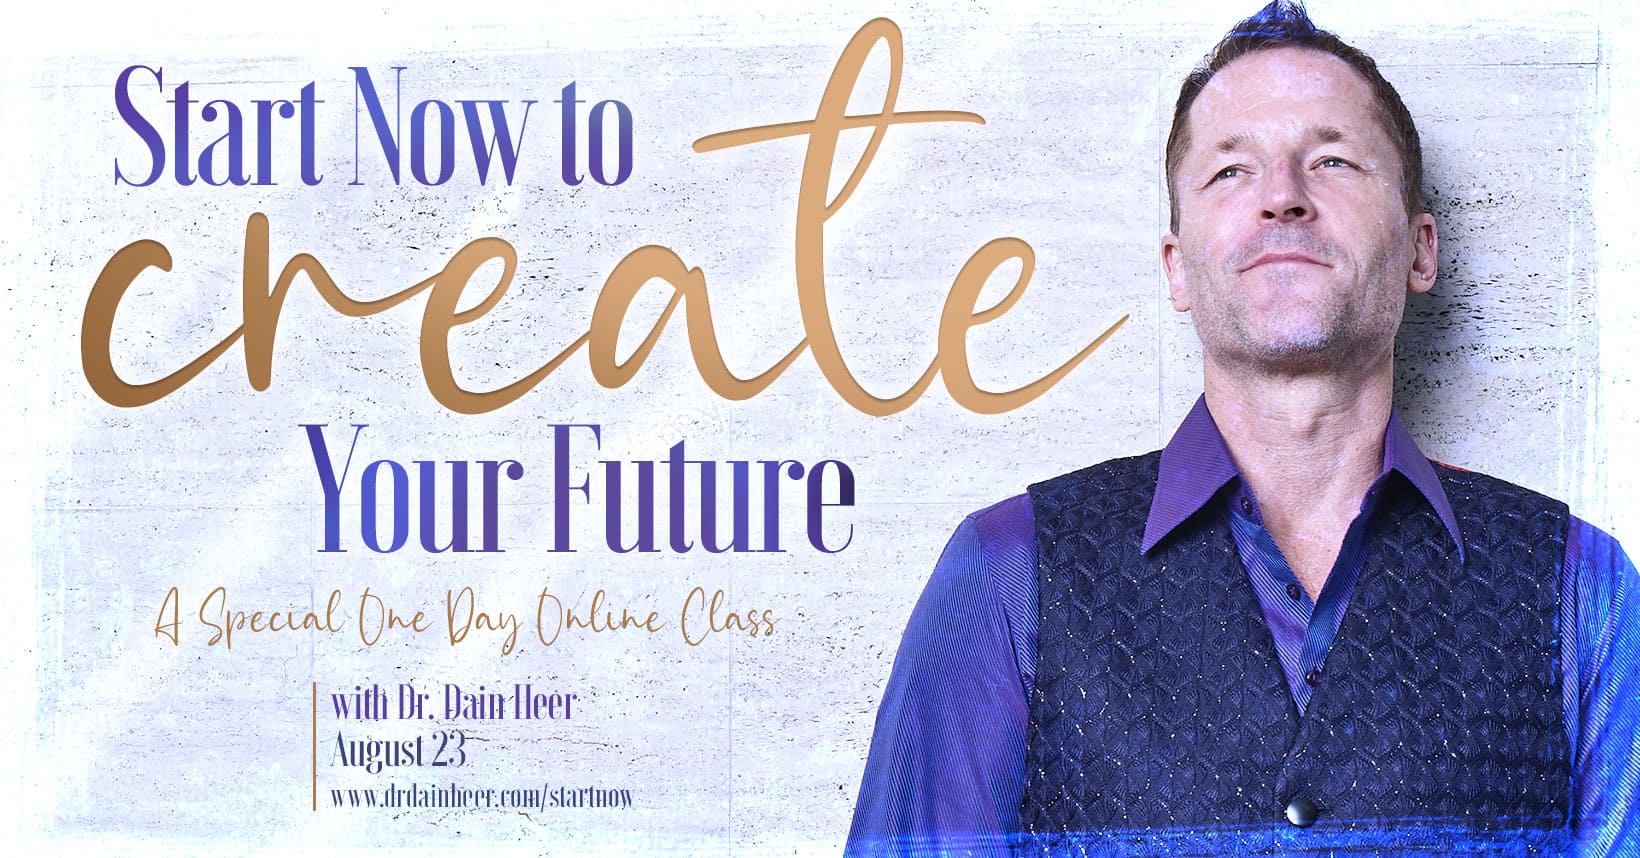 Start-Now-to-Create-Your-Future-Aug2020.jpg